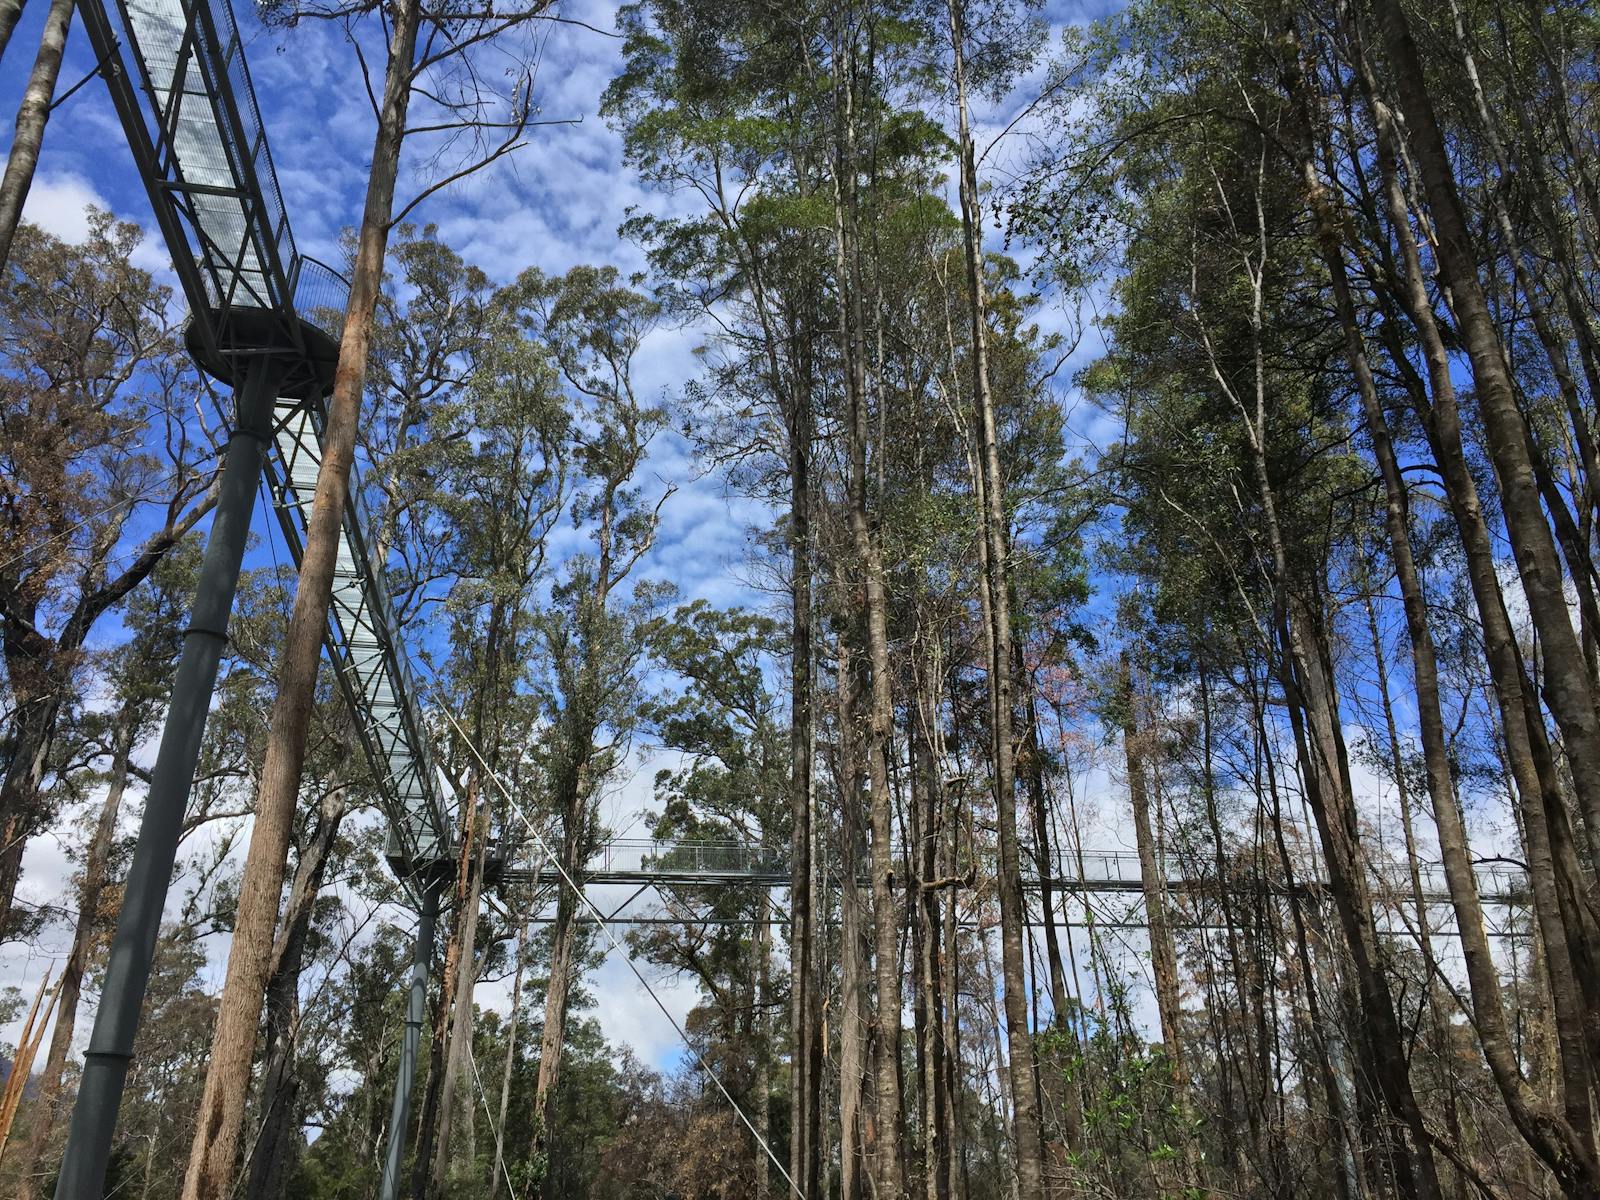 View of airwalk platform from ground surrouded by trees